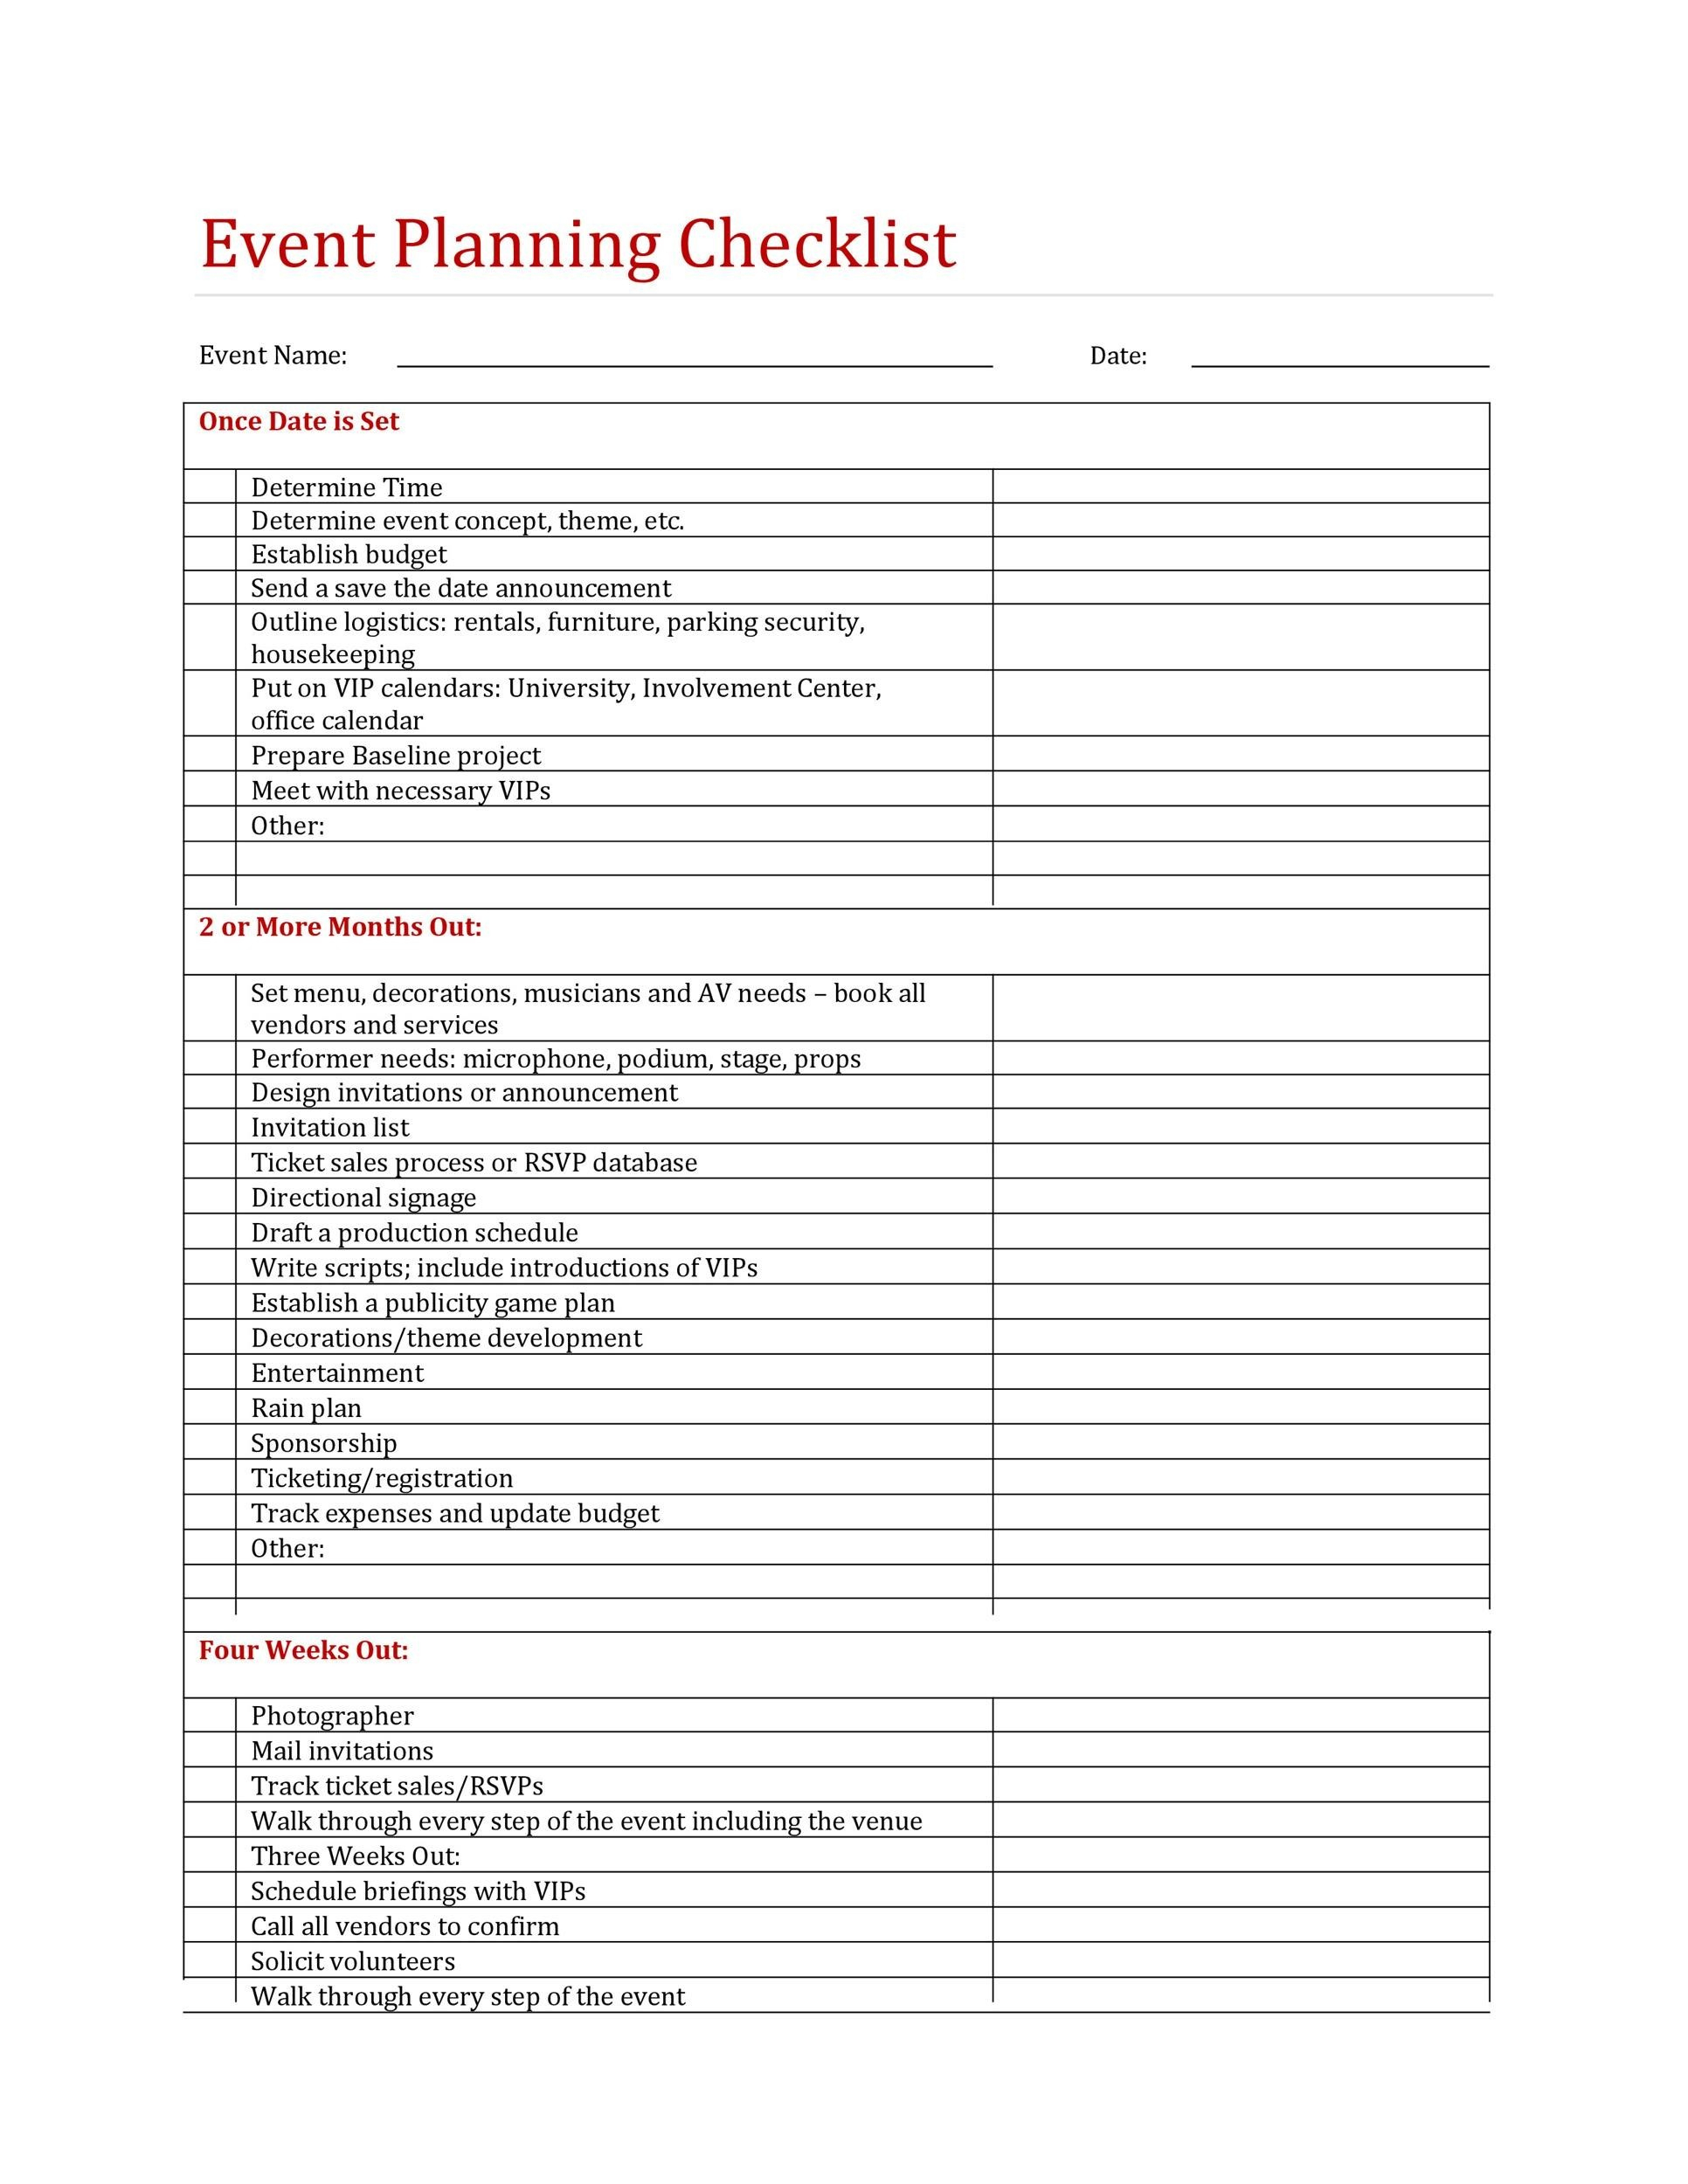 10 Professional Event Planning Checklist Templates ᐅ TemplateLab Intended For Meeting Planning Checklist Template